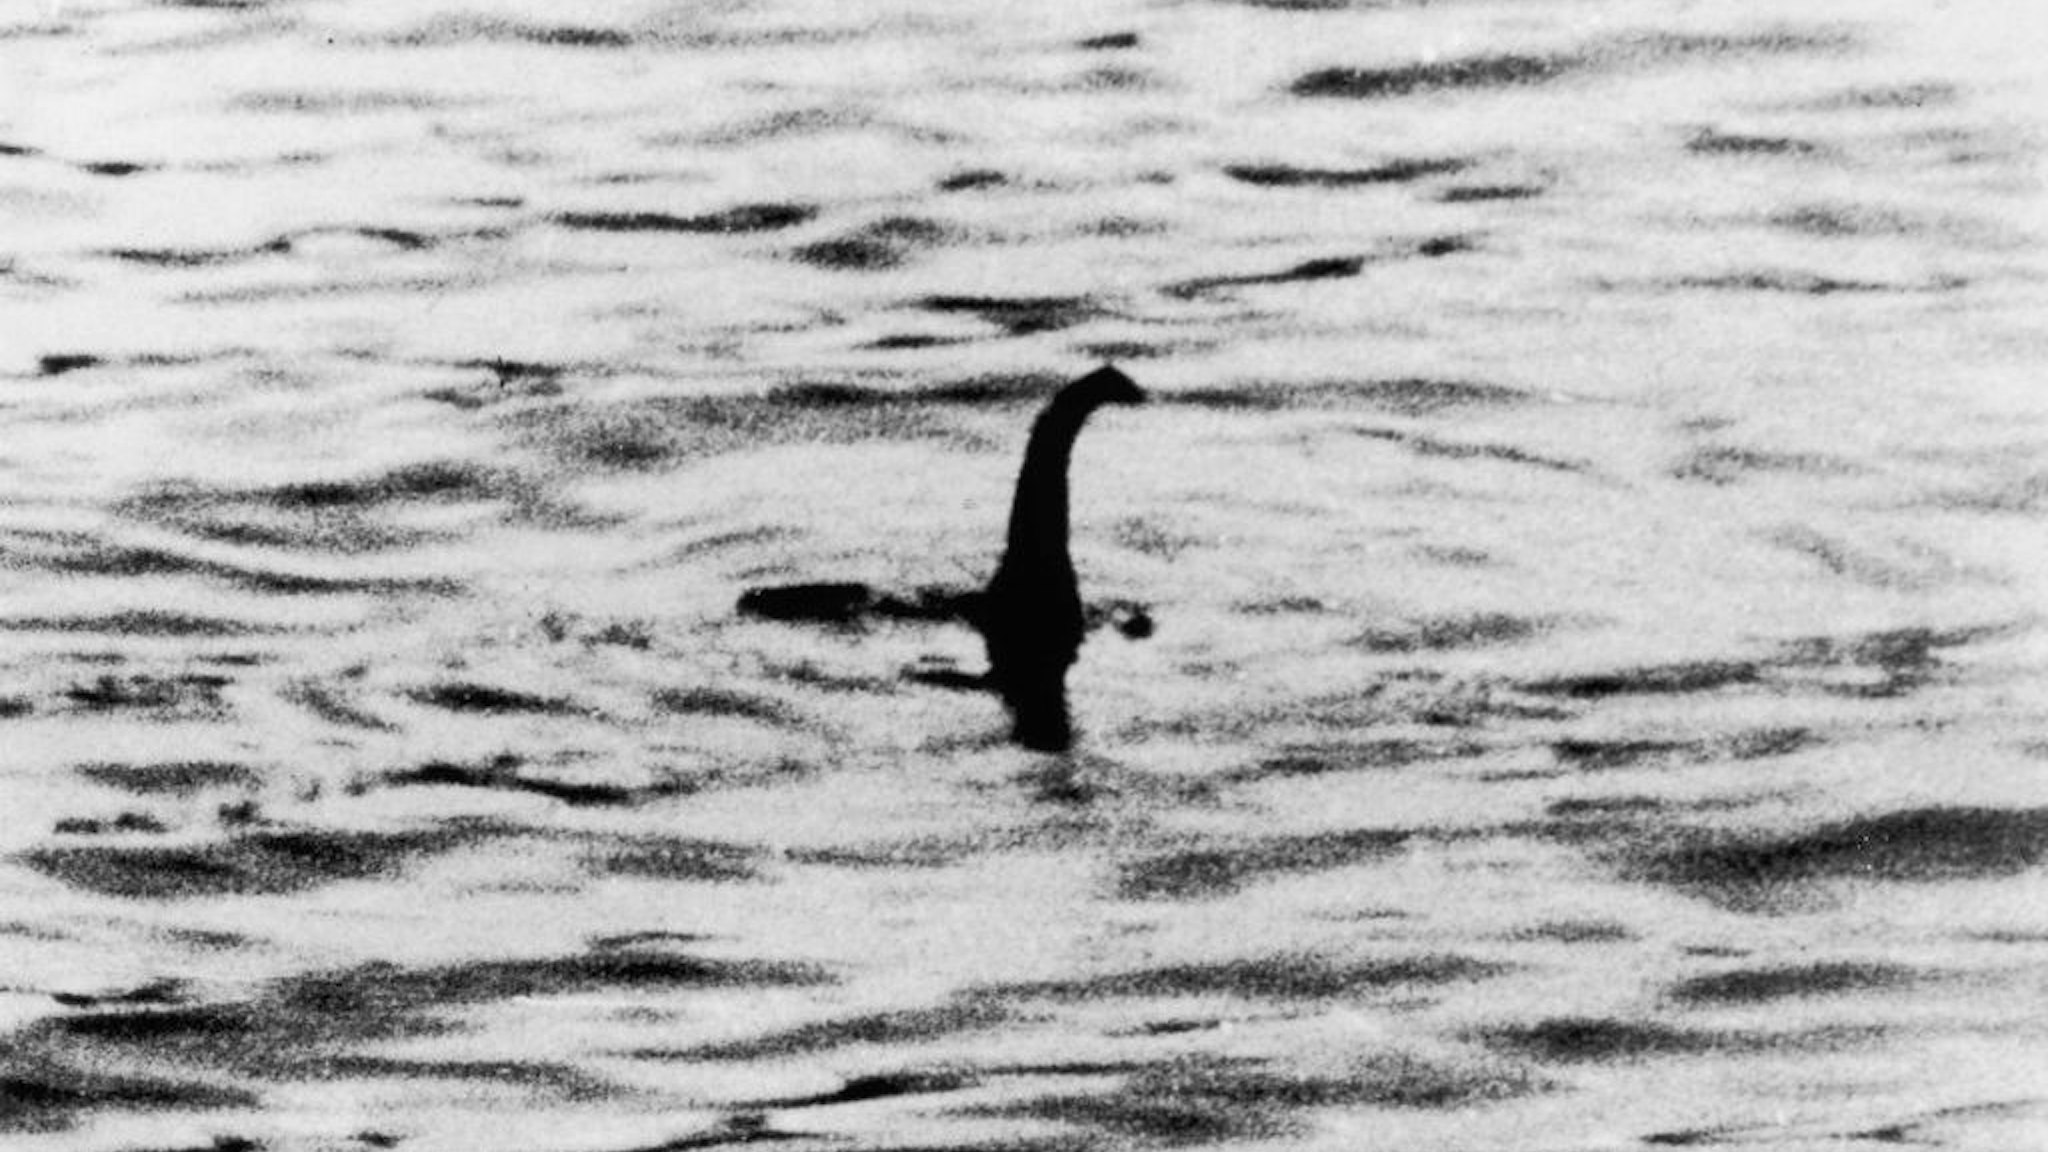 A view of the Loch Ness Monster, near Inverness, Scotland, April 19, 1934. The photograph, one of two pictures known as the 'surgeon's photographs,' was allegedly taken by Colonel Robert Kenneth Wilson, though it was later exposed as a hoax by one of the participants, Chris Spurling, who, on his deathbed, revealed that the pictures were staged by himself, Marmaduke and Ian Wetherell, and Wilson. References to a monster in Loch Ness date back to St. Columba's biography in 565 AD. More than 1,000 people claim to have seen 'Nessie' and the area is, consequently, a popular tourist attraction. (Photo by Keystone/Getty Images)